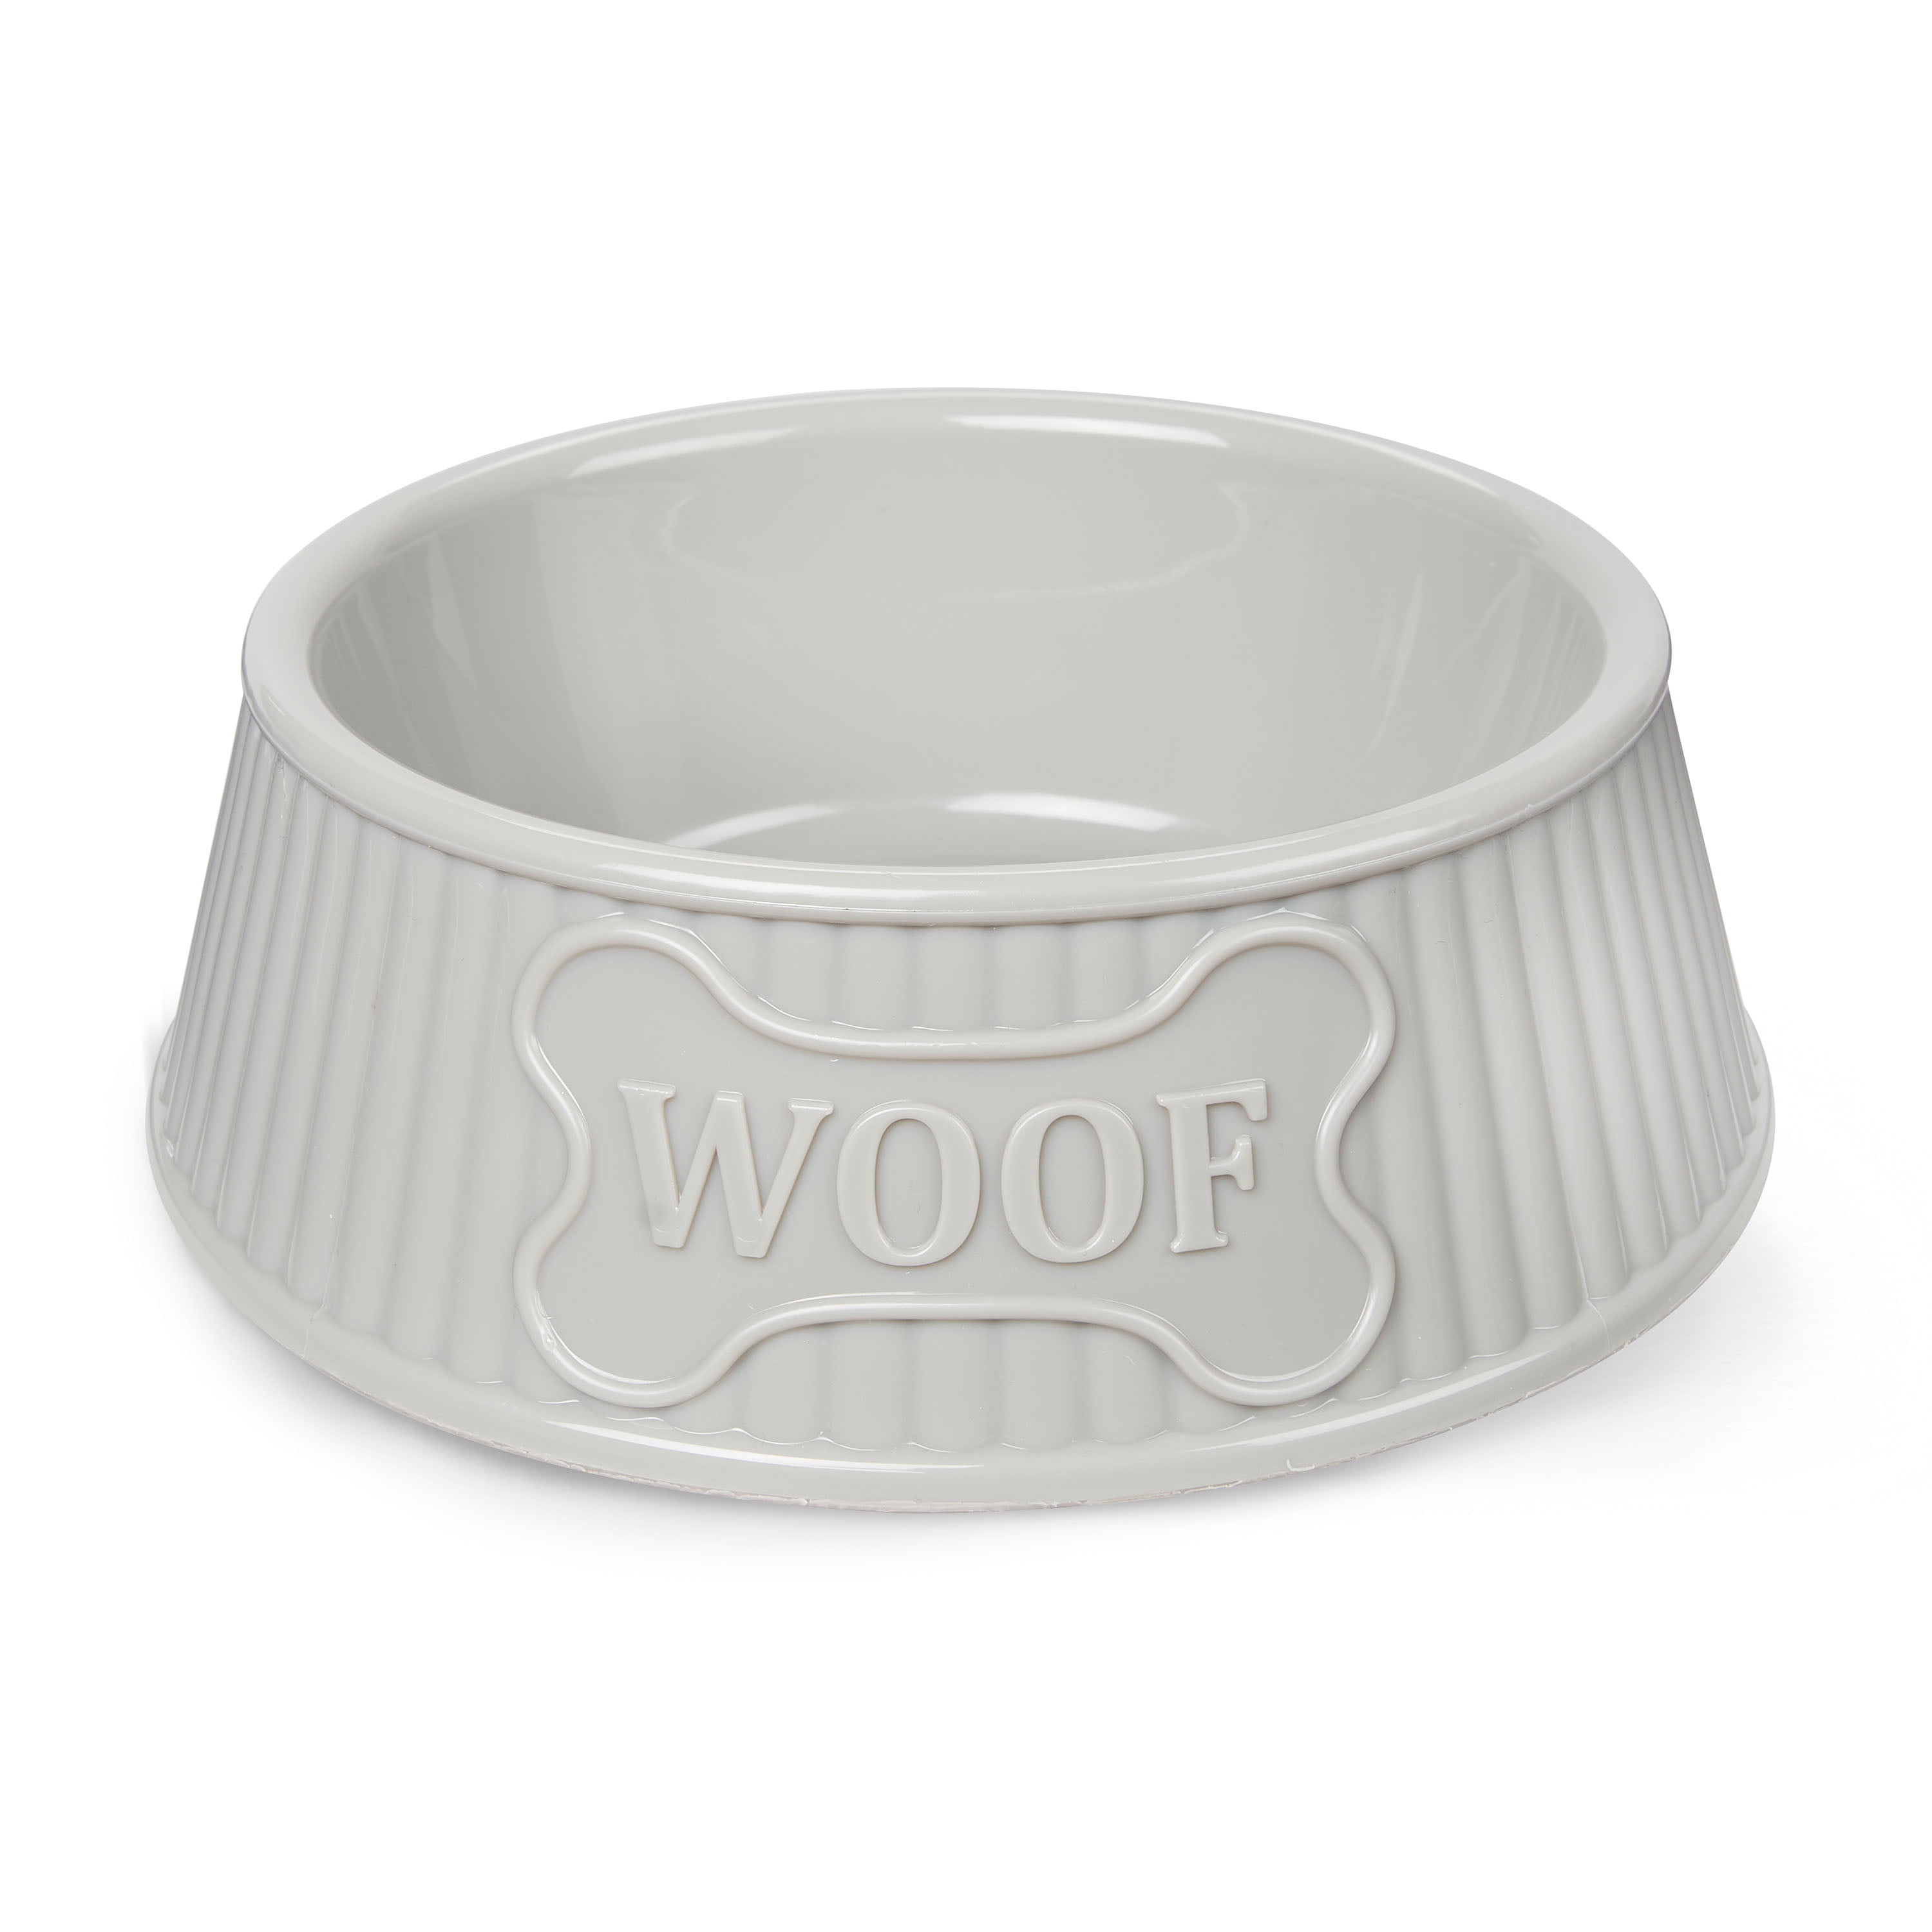 Vibrant Life Stainless Steel Dog Bowl with Paws, Large